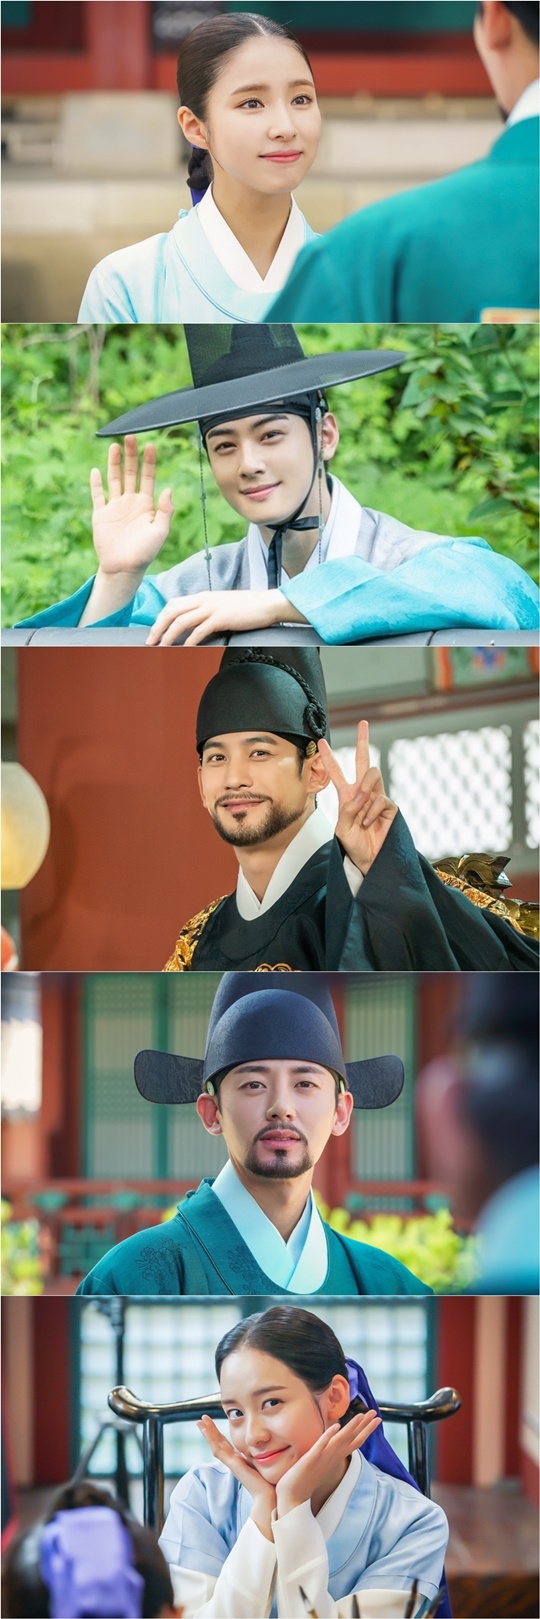 Na Hae-ryung will be Absent for 11th and 12th consecutive days due to Chuseok holiday this week.Shin Se-kyung, Cha Eun-woo, Park Ki-woong, Lee Ji-hoon, and Park Ji-hyun are promising to broadcast next week with a flower smile to soothe Absents regrets.MBC drama Na Hae-ryung said on the 9th, We have been broadcasting this week for the national holiday Chuseok.I am going to visit Kahaani, which is richer and more exciting next week, on the 18th, so I would like to ask for your expectation. Na Hae-ryung, starring Shin Se-kyung, Cha Eun-woo, and Park Ki-woong, is the first problematic Ada Lovelace () of Joseon and the full-length romance of Prince Irim, the anti-war mother Solo.Lee Ji-hoon, Park Ji-hyun and other young actors, Kim Min-Sang, Choi Deok-moon, and Sung Ji-ru are all acting actors.As the new employee, Na Hae-ryung, is Absent on the 11th and 12th, attention is focused on the move of Ada Lovelace Na Hae-ryung.The wind of change that she brings to and from Korea, the pink romance with Irim, and the unpredictable Kahaani 20 years ago are raising the topic every time.Among them, Na Hae-ryung is a new history of Joseon as Ada Lovelace.After returning from her childhood in the Qing Dynasty, she spurred the Wedding Bible, which was formed by the forced family, and took the path of Ada Lovelace.Na Hae-ryung, who showed the spirit that the tense given by Prince Lee Jin (Park Ki-woong) in the Ada Lovelace star poem was wrong.As Kwon Ji (now an intern), she began her life as a non-green palace, receiving the mother-in-law of her seniors and the despise of her masters.Nevertheless, Na Hae-ryung found absurdity that is happening in Gwangheungchang and the corruption of personnel in Ijo, and gave catharsis to viewers in a way that tried to correct it and was responsible.In particular, the scene where she received an apology by making a conversation with Lee Tae-tae (Kim Min-Sang), the current king of Hamyoung-gun, and expanded the position of the officers was an unprecedented female character who reversed the history of Joseon.The romance Na Hae-ryung presents with Lee Rim is also a hot topic.The two men, who met for the first time in the bookstore, grew up together with each others pain and became pink fruit as a result.Above all, Irim met Na Hae-ryung and realized himself as a true prince by personally experiencing the outside world of the Green Sea Party, where he was trapped and trapped.Unlike the early days when he was nervous and nervous about Ham Young-guns call, he is being supported by viewers by revealing his presence gradually, such as pinching Ham Young-guns fault and saying that he will be responsible for his actions.Lee enjoyed the happiness of Confessions and the love of Na Hae-ryung, who became the driving force of his growth.Happiness also fell short of Ham Young-guns name to raise Wedding Bible for a while, and Na Hae-ryung turned from him.She said that she could throw away everything, and she was curious about how their romance would flow.Lee Jin is trying to make a lonely effort to develop politics for the people between Ham Young-gun and Choi Deok-moon.He has shown deep friendship with his infinite affection for his brother Irim.Among them, as Lee Rim, who is mentioned as the enemy of the former owner Lee Kyeom (played by Yoon Jong-hoon), who disappeared from the past 20 years ago, is drawn at the end of the last broadcast, there is growing interest in how Lee Jin will react to the past 20 years ago, when Lee Jin is gradually being revealed.As Na Hae-ryung is revealed to be the daughter of Seo Moon-jik (Lee Seung-hyo), the head of Seoraewon, there is a growing interest in how the fate of those who have been unknowingly connected for 20 years and how they will flow later.Meanwhile, the 33-34th Na Hae-ryung starring Shin Se-kyung, Cha Eun-woo and Park Ki-woong will be broadcasted at 8:55 pm on Wednesday, 18th due to the Chuseok holiday Absent.